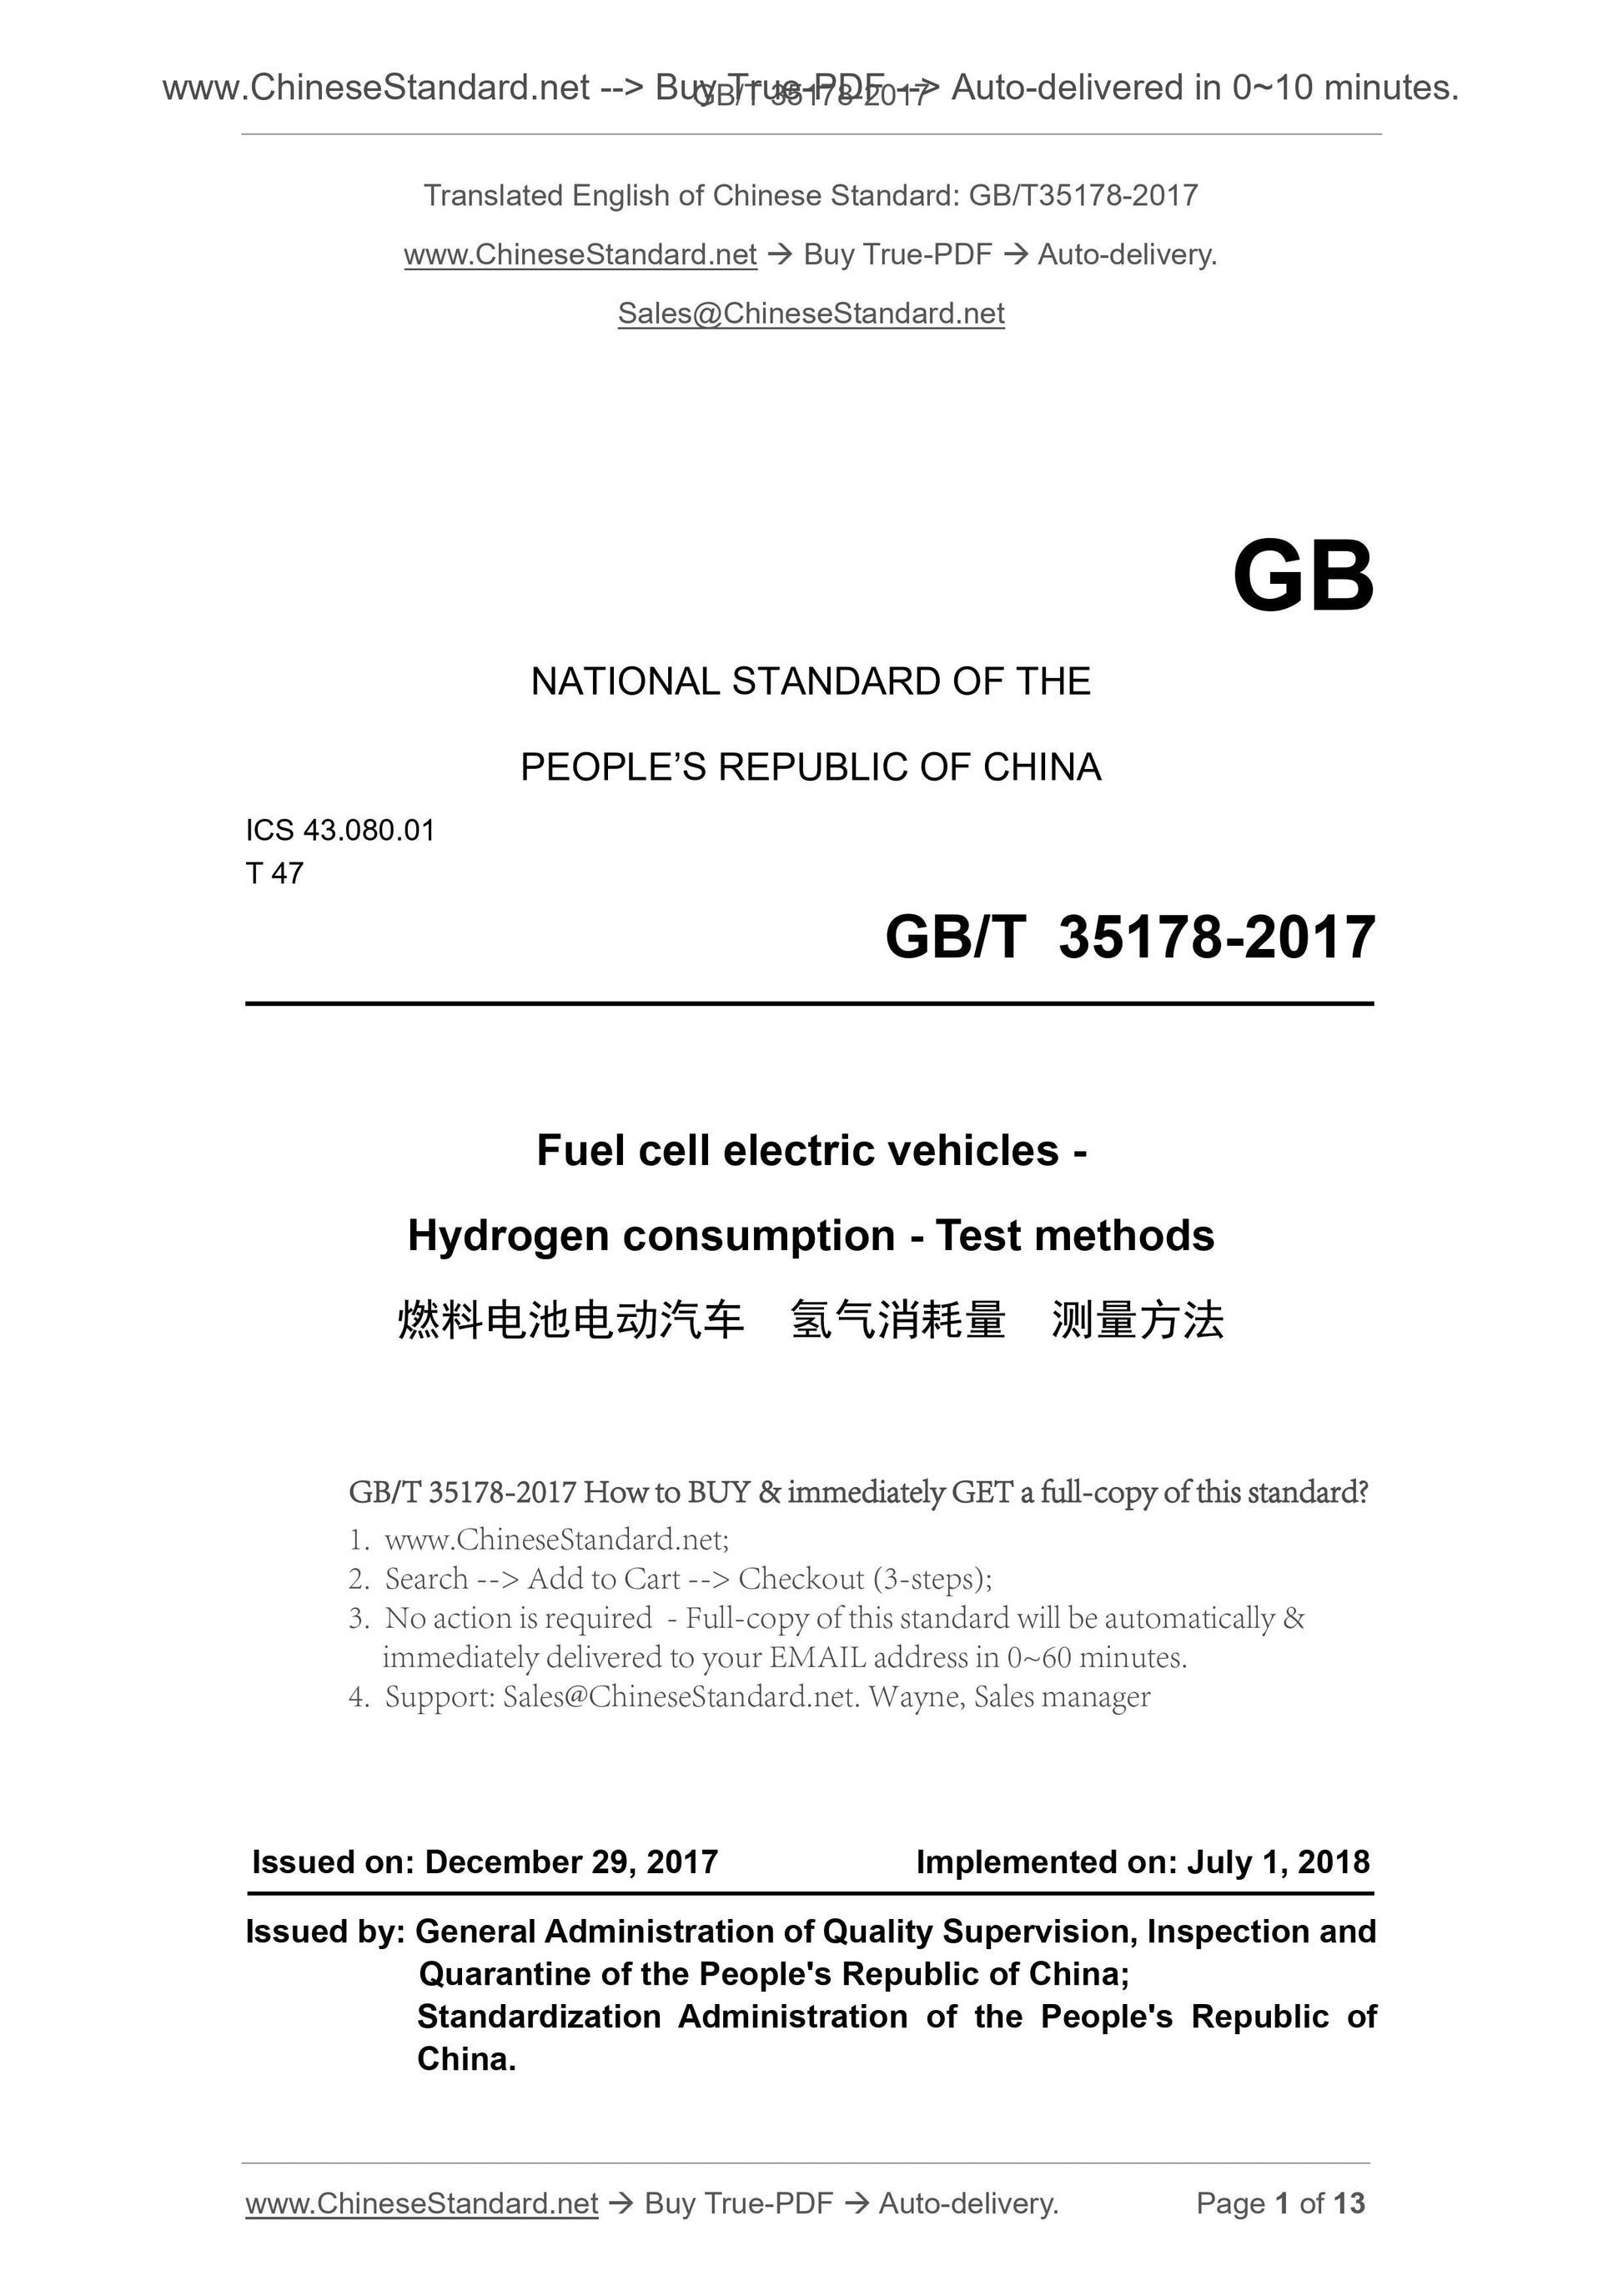 GB/T 35178-2017 Page 1